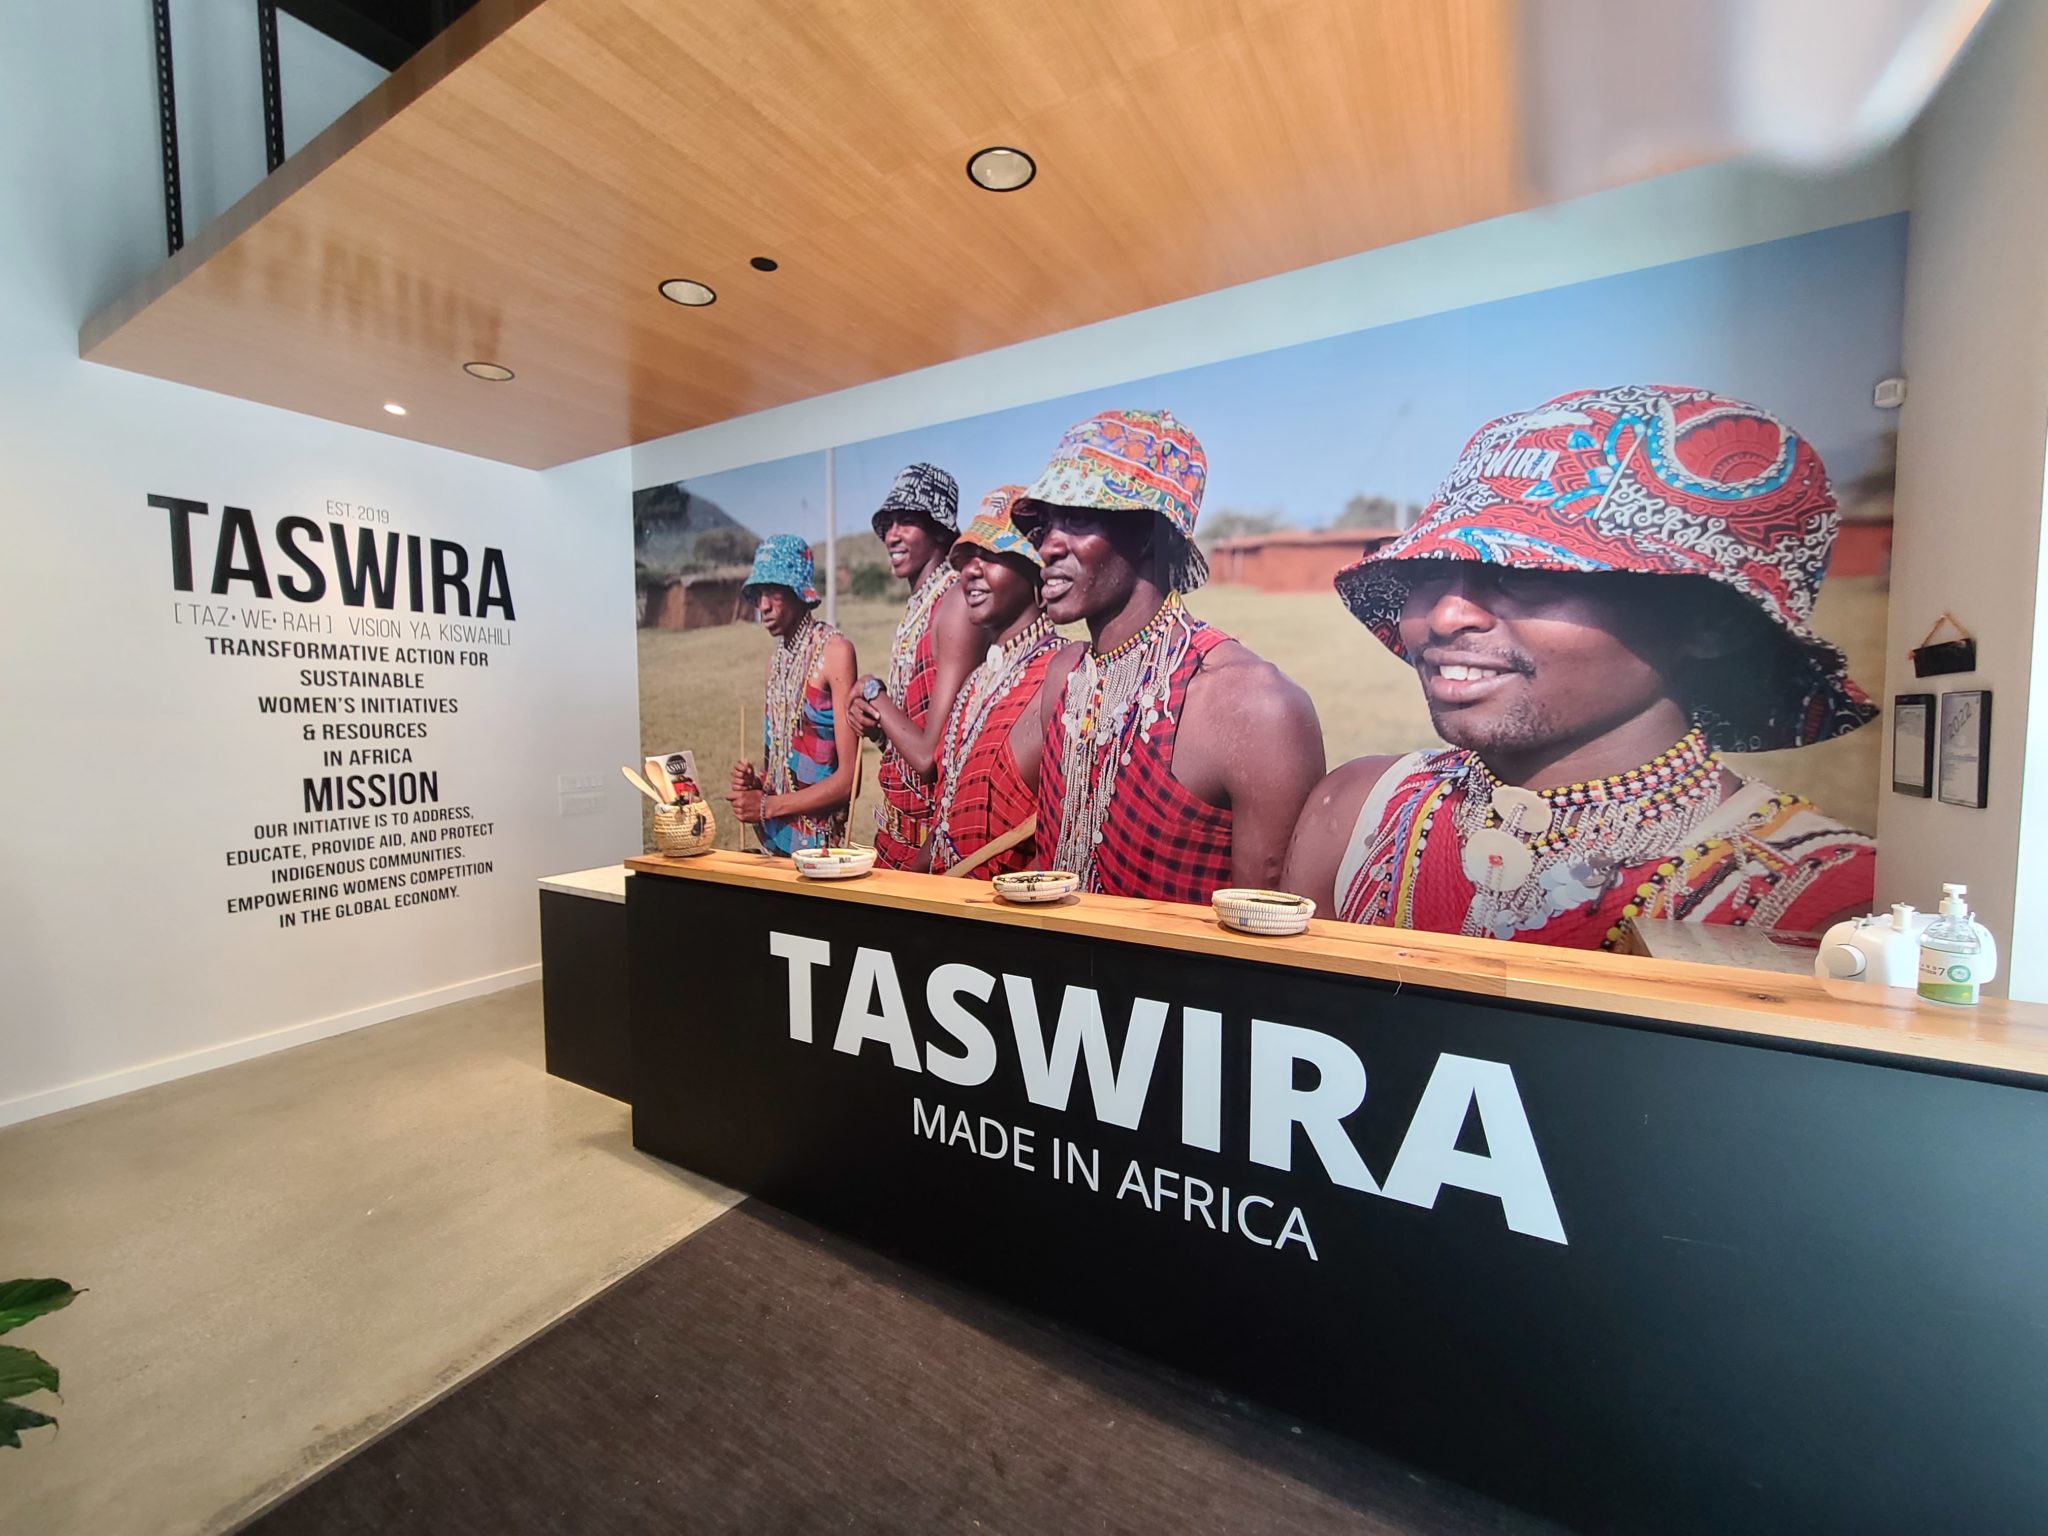 The Taswira pop-up shop, located in Seattle's Pioneer Square neighborhood.